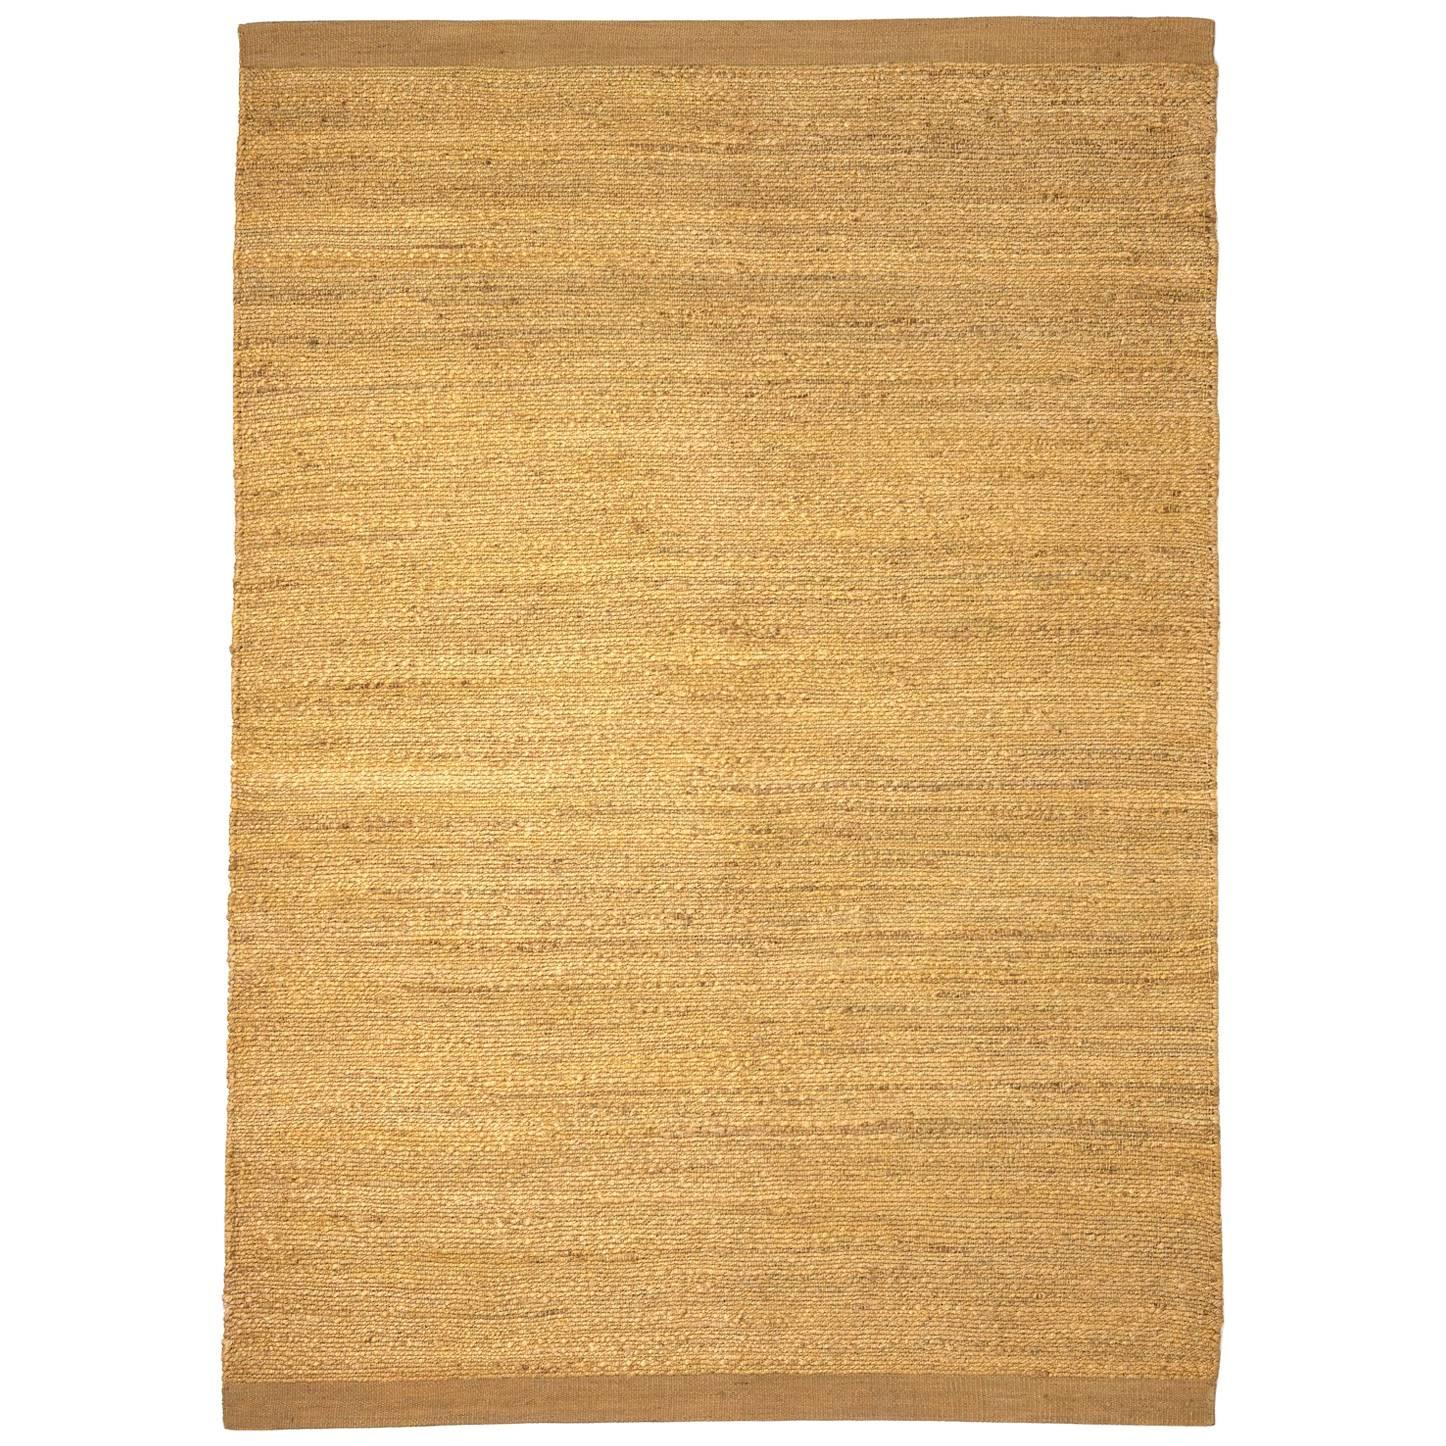 Hand-Loomed Herb Rug by Nani Marquina in Yellow, Small